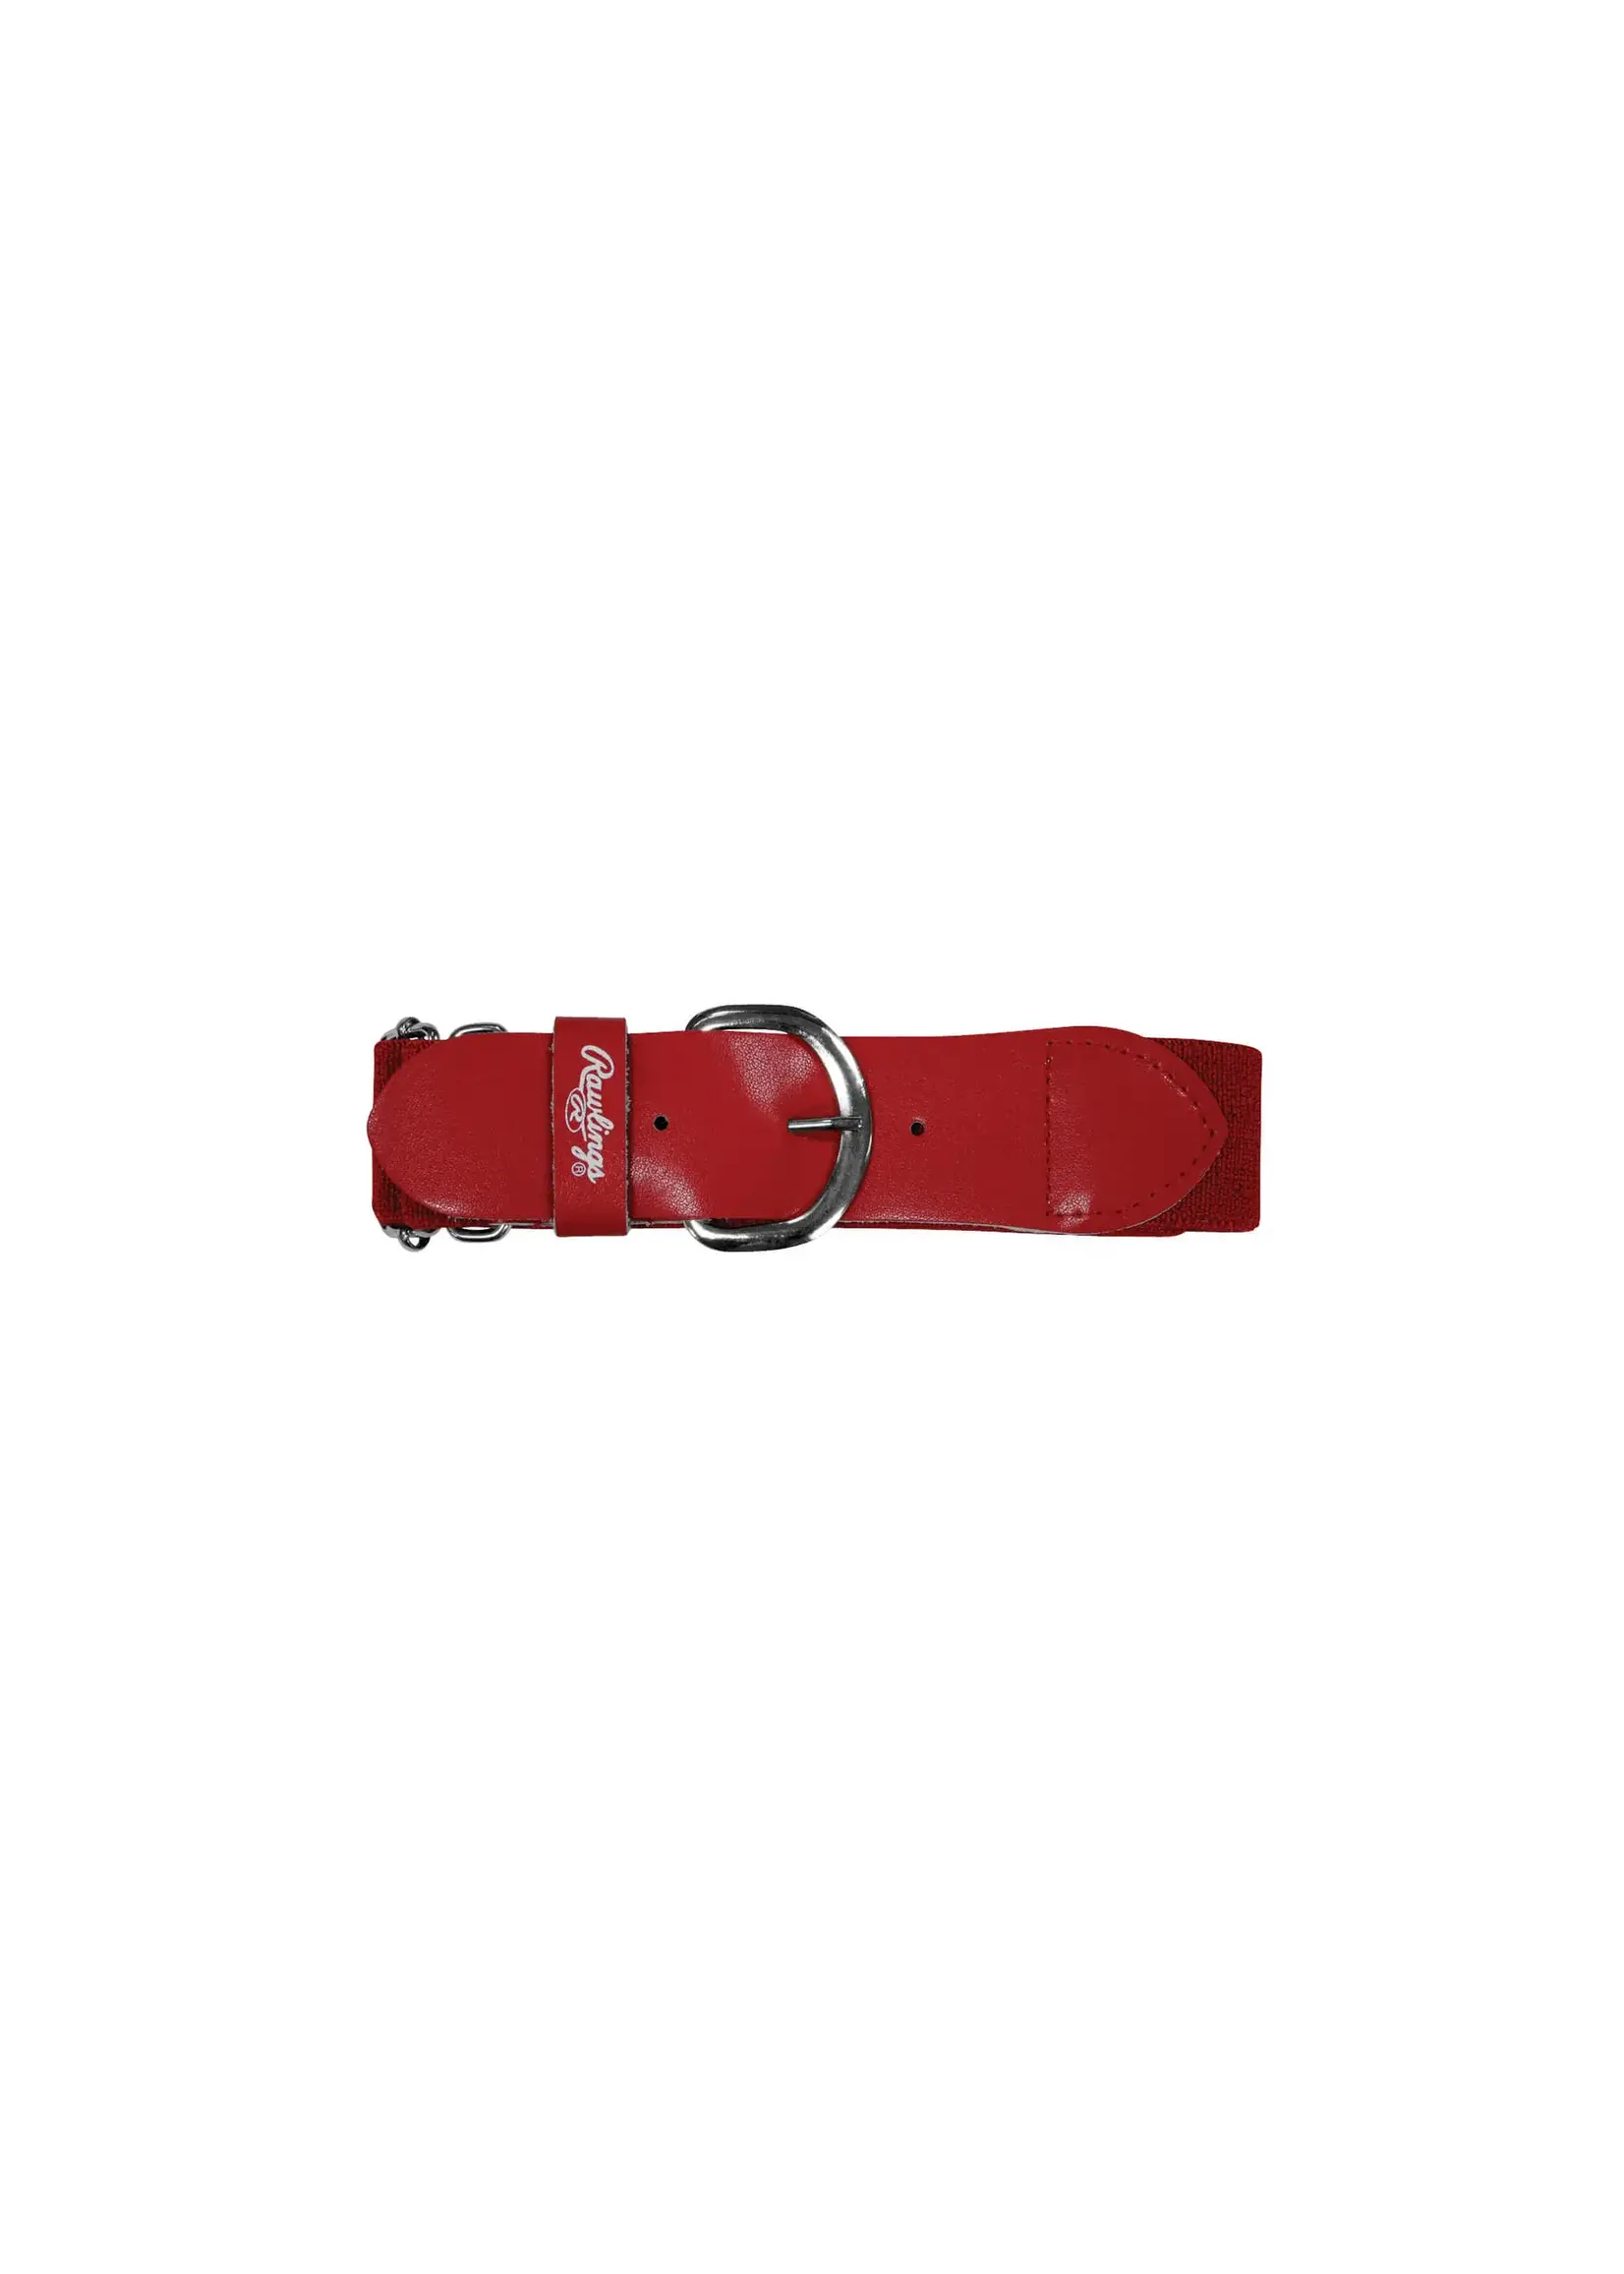 RAWLINGS YOUTH ADJUSTABLE BELT- RED